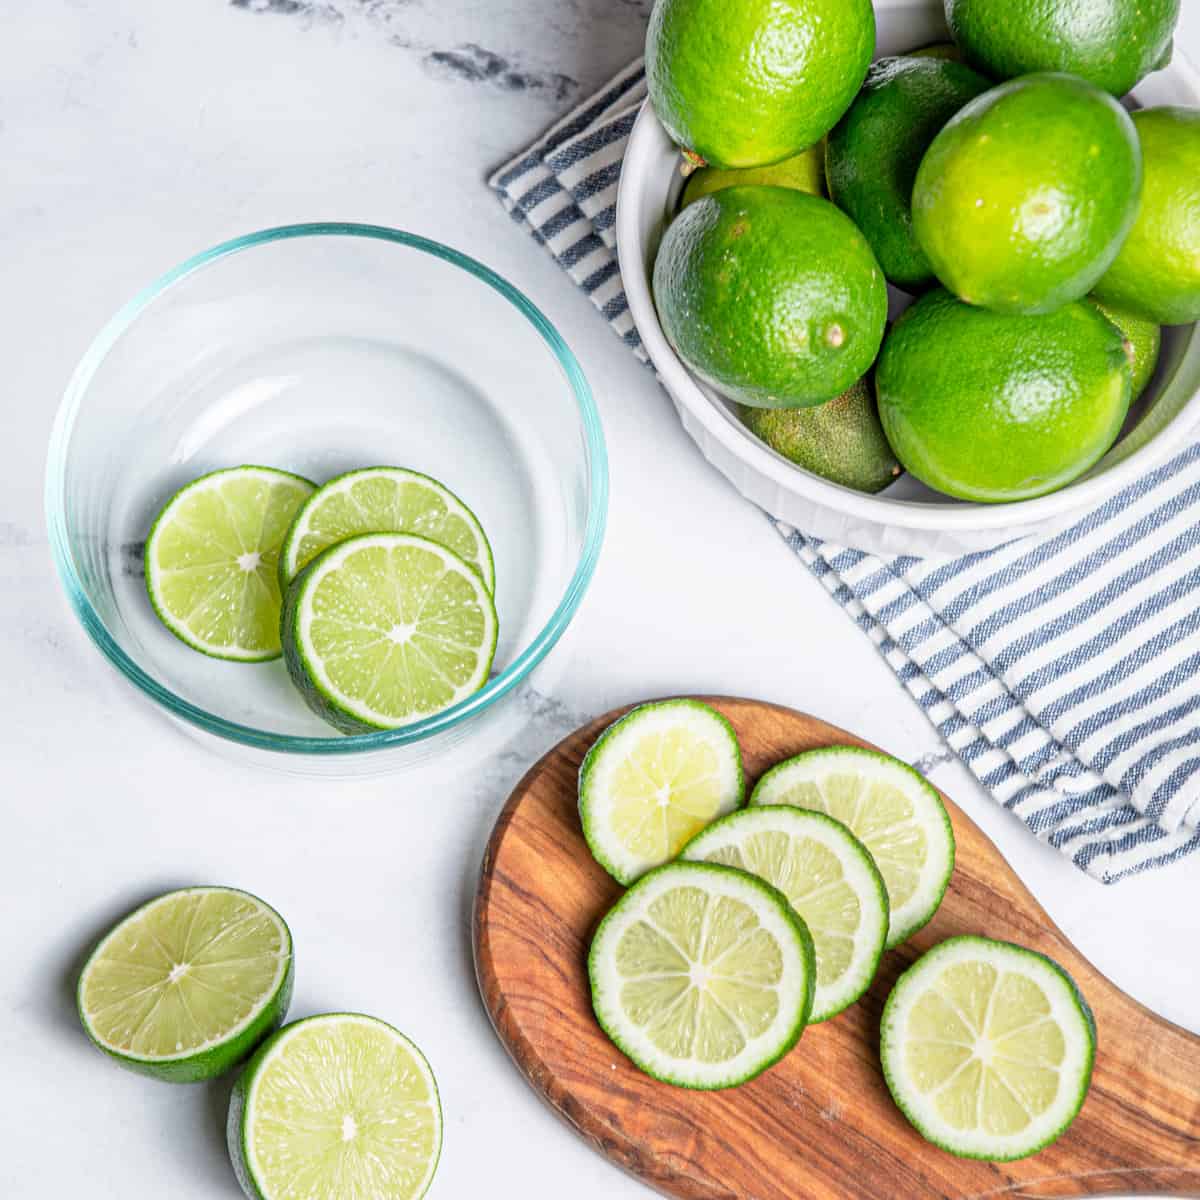 Limes being sliced on a wooden chopping board.